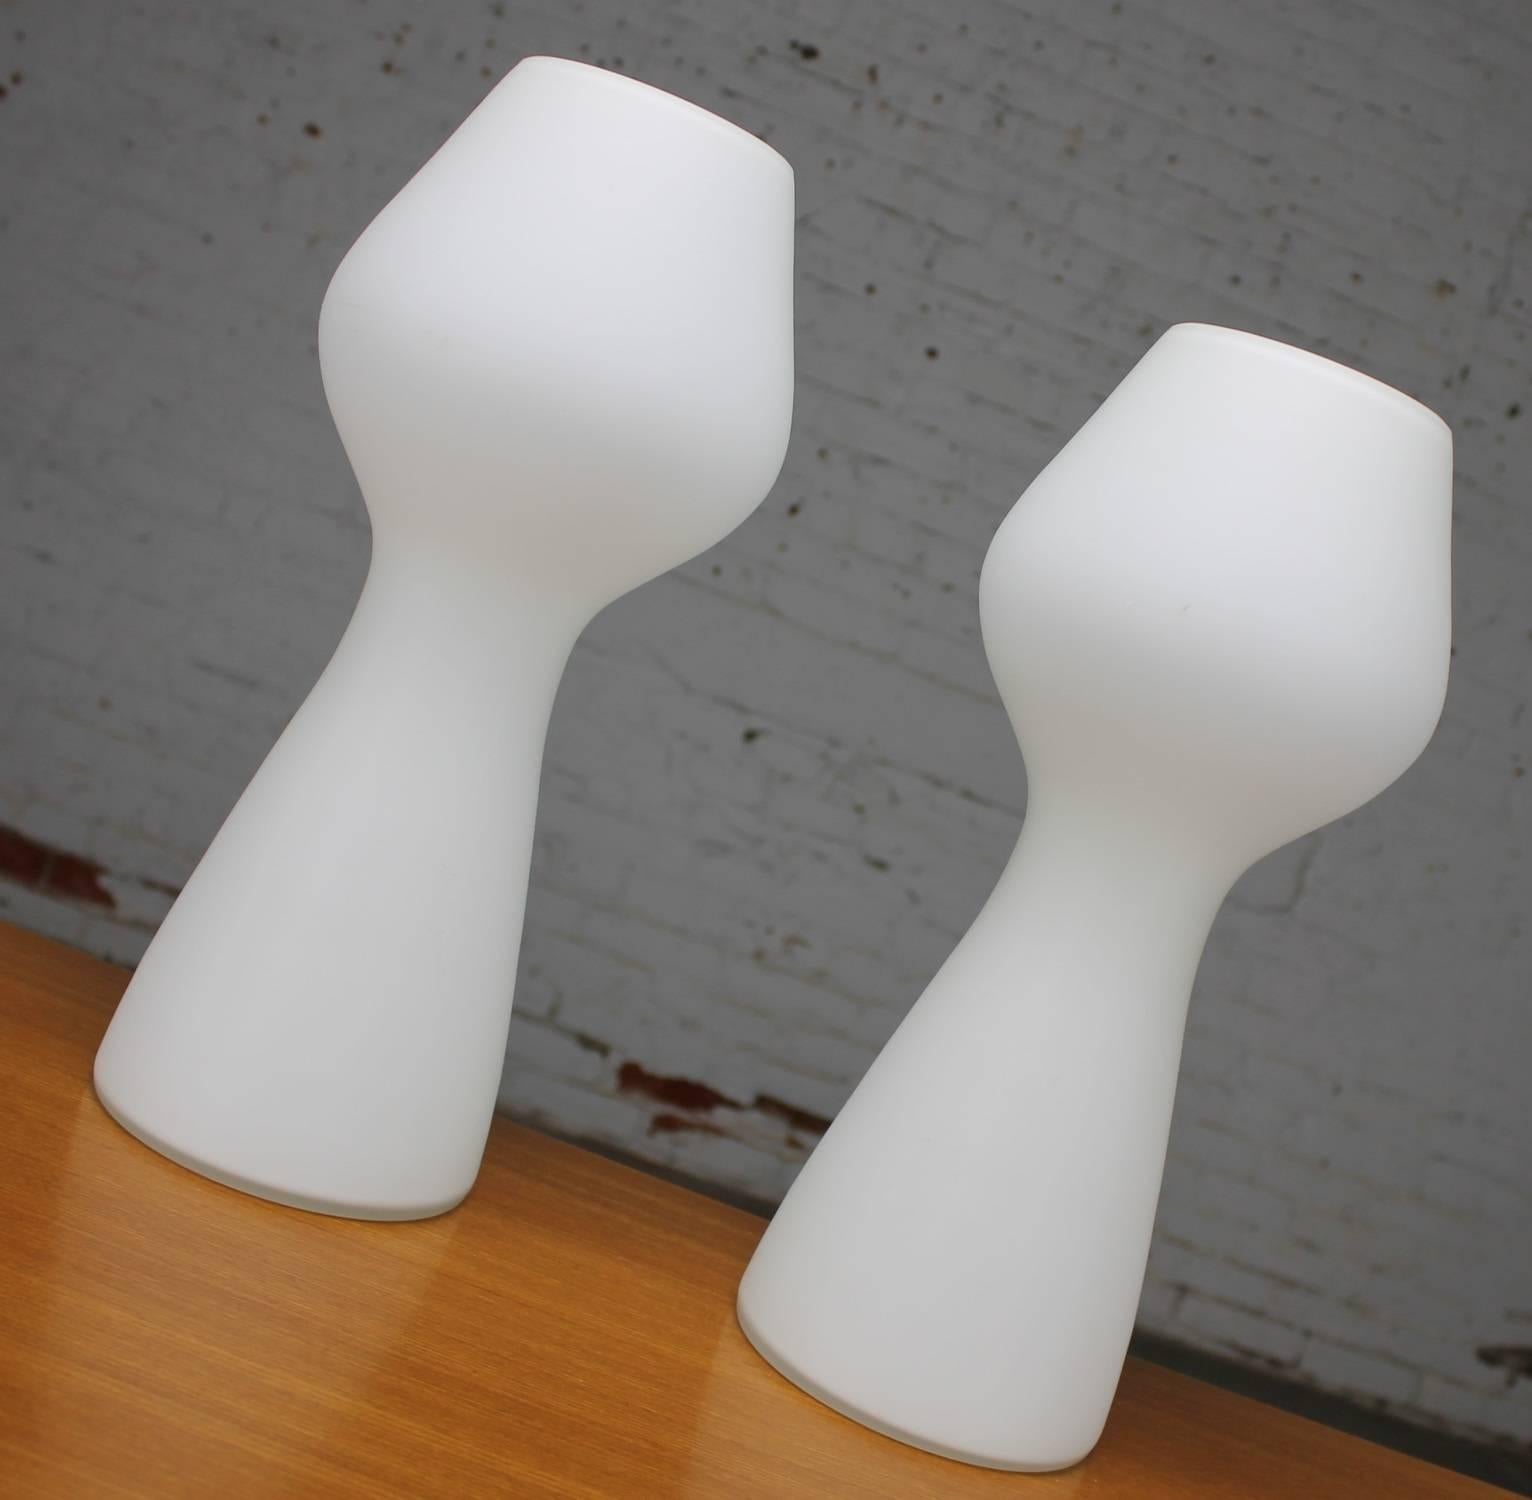 Offered now are a pair of opaque white glass lamps in the style of Lisa Johansson-Pape for Finnish company Orno Stockmann made by Iittala in the shape of a bulbous mushroom. This outstanding vintage Mid-Century Modern or Scandinavian Modern pair are